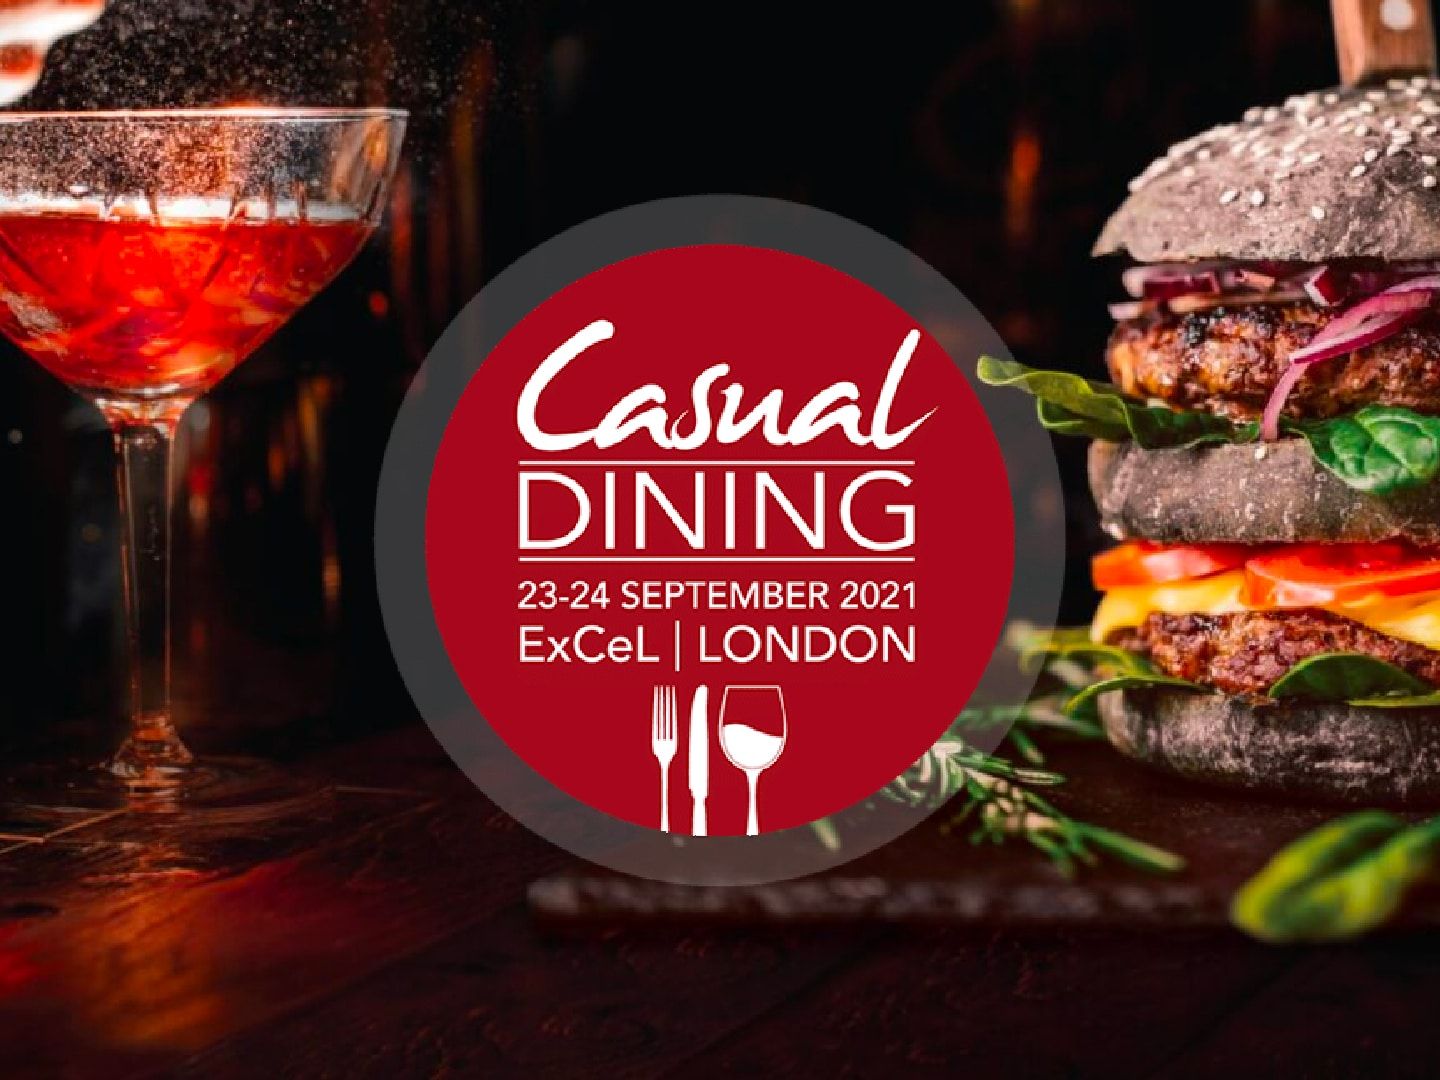 Peach 20/20 Founder Peter Martin confirmed to speak at this year’s Casual Dining